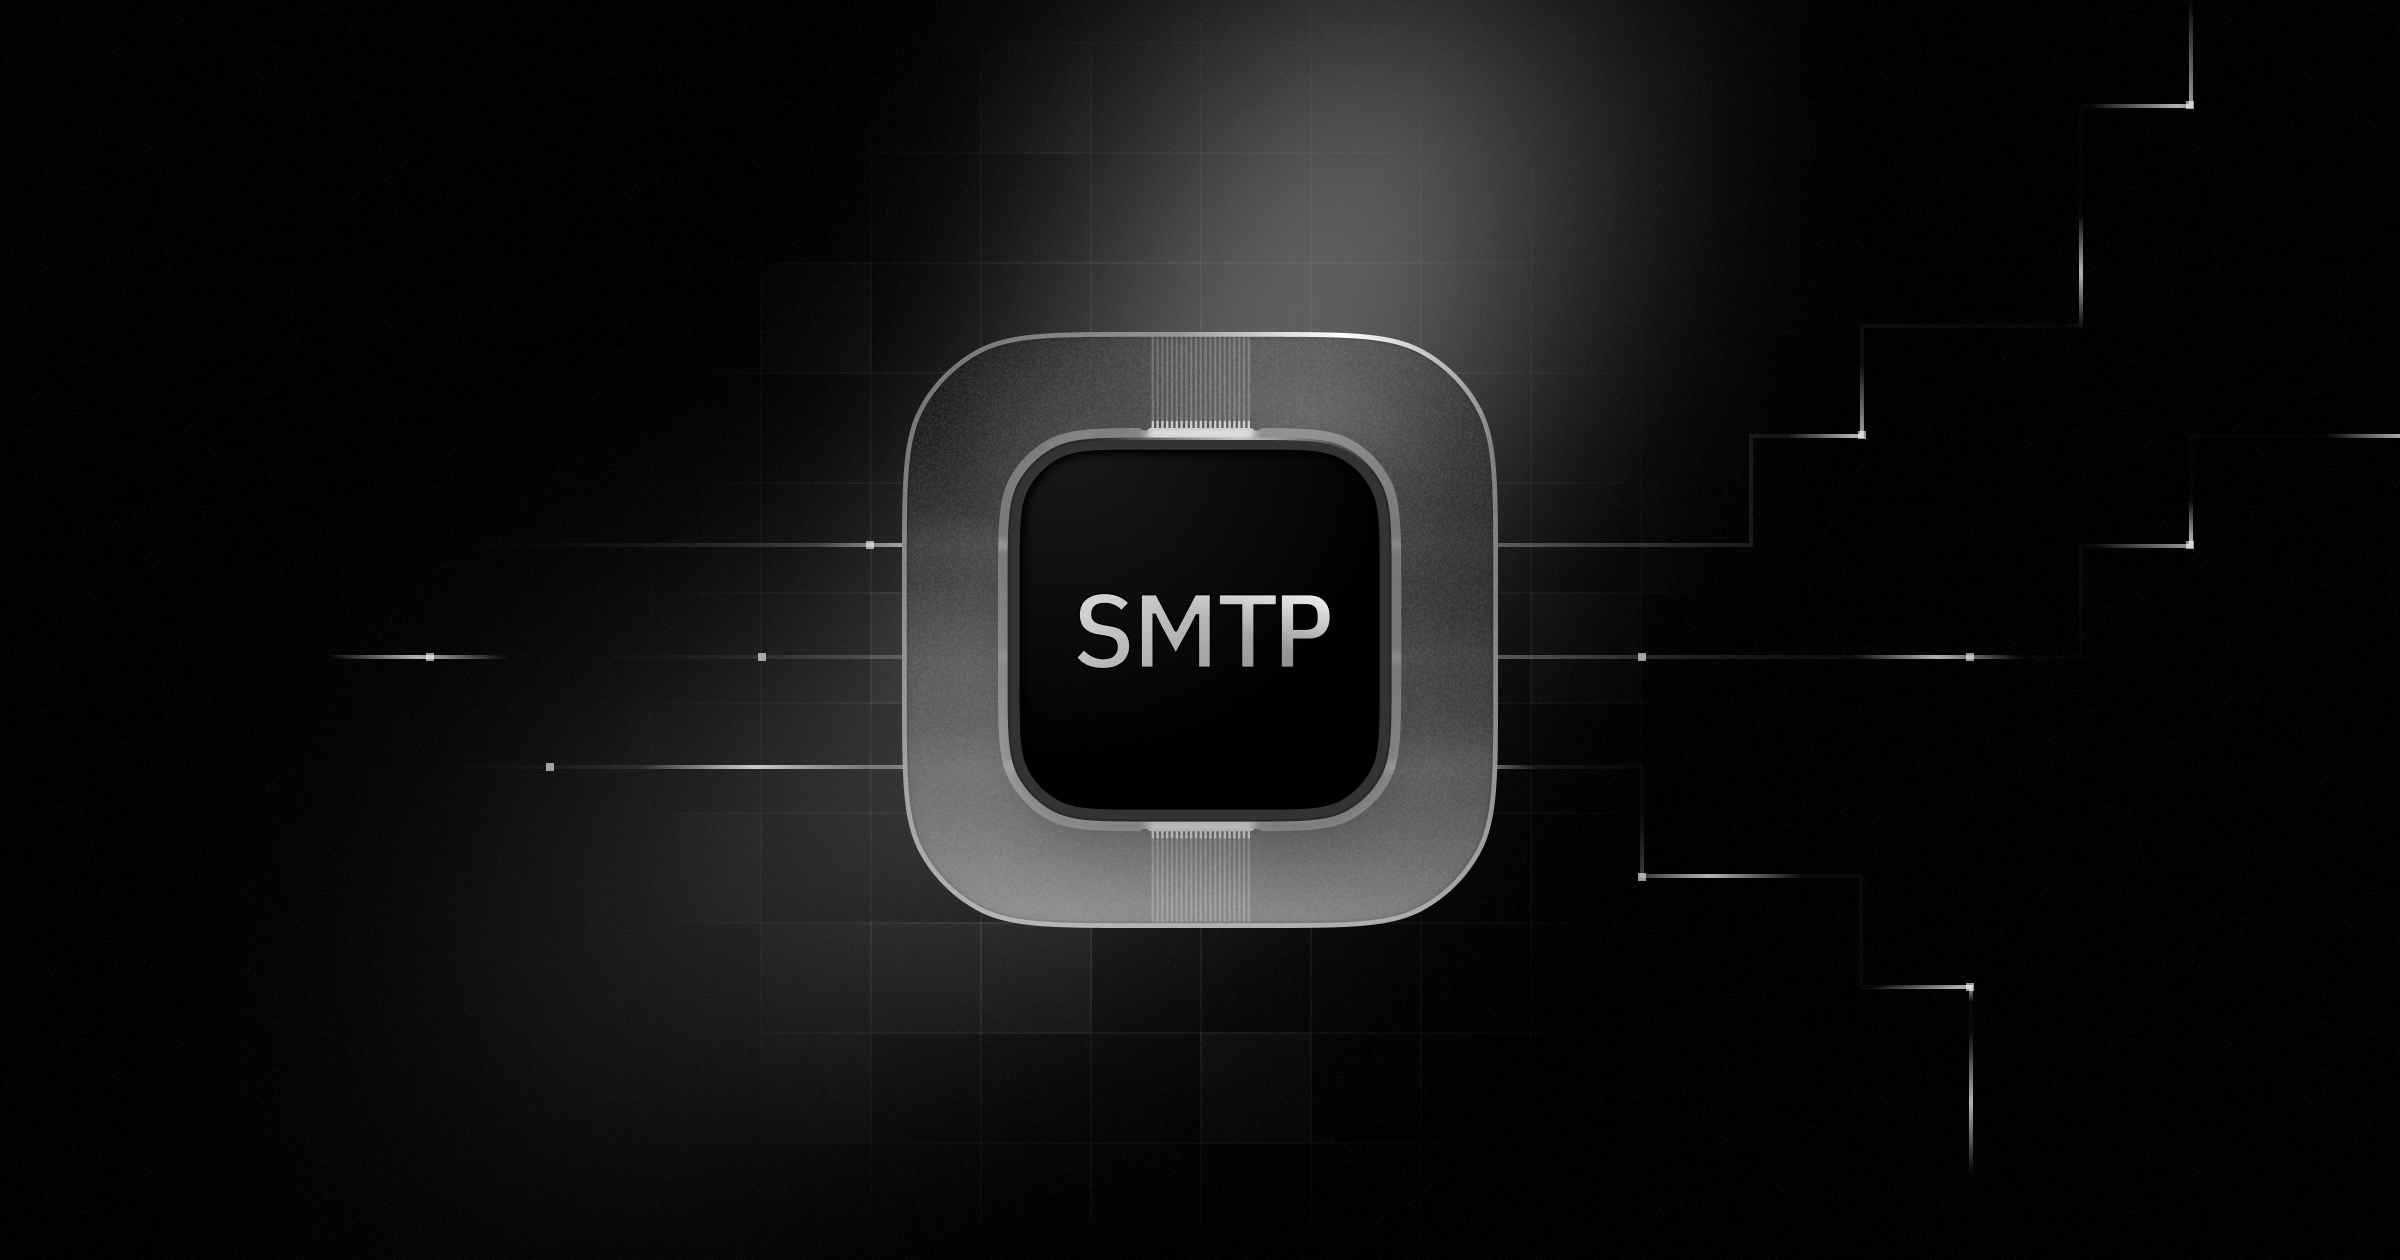 Why SMTP still matters today